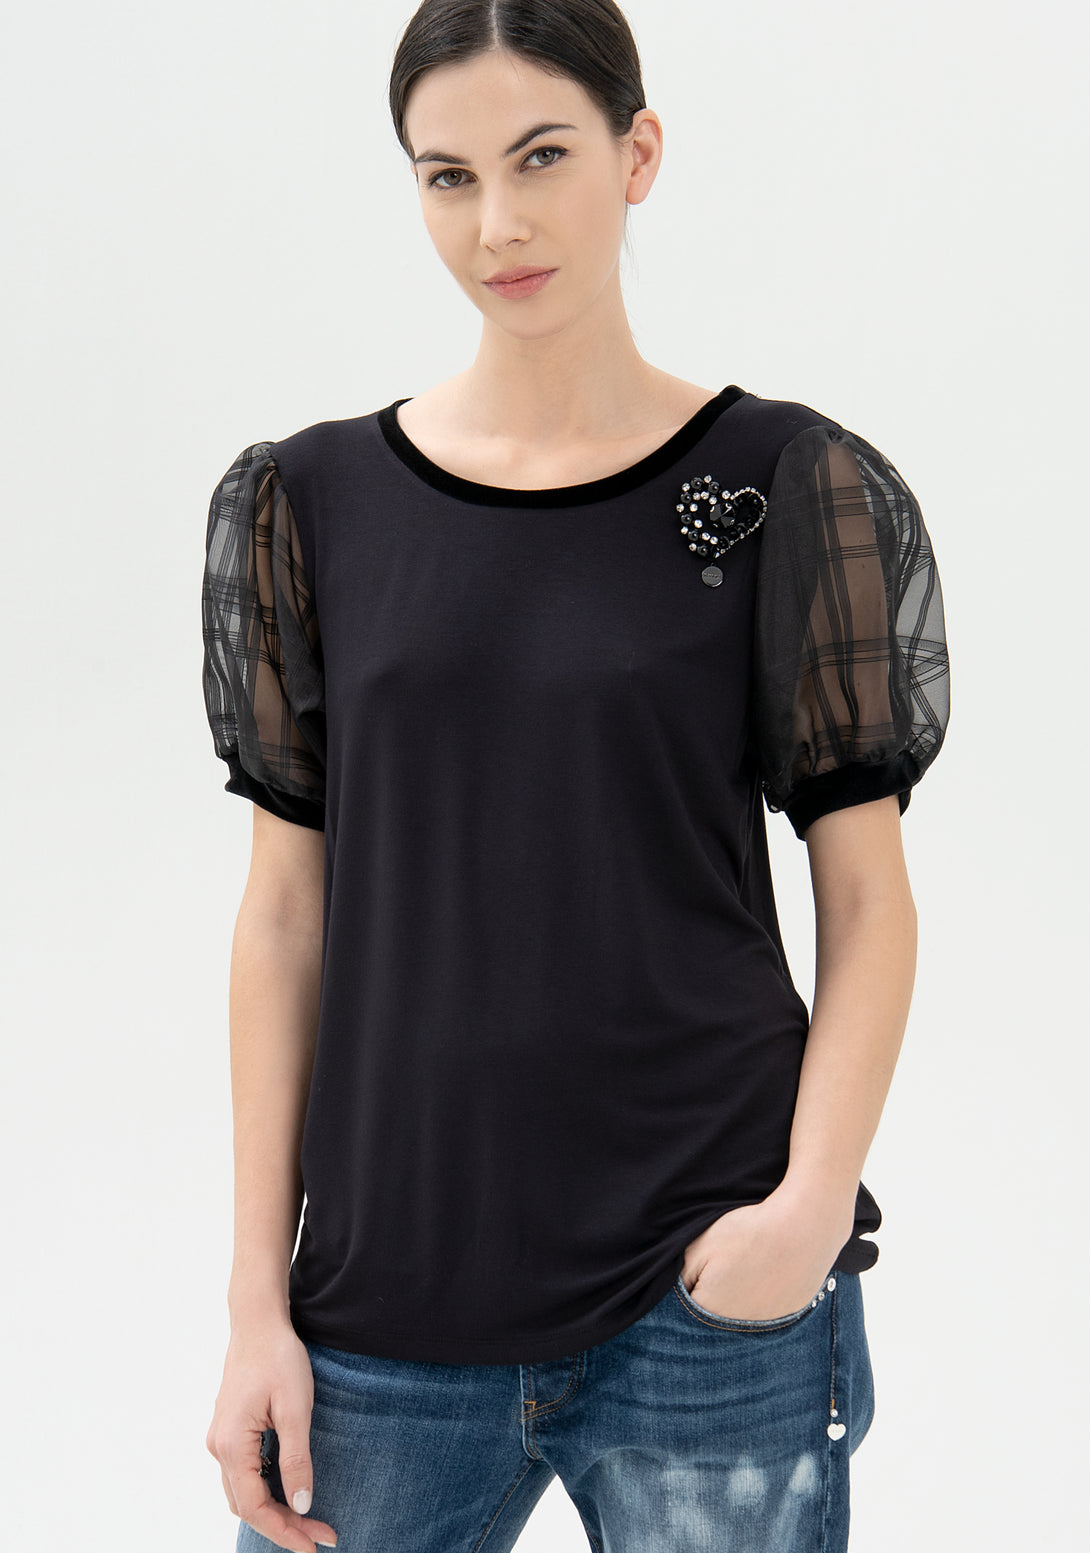 T-shirt over fit made in viscose jersey